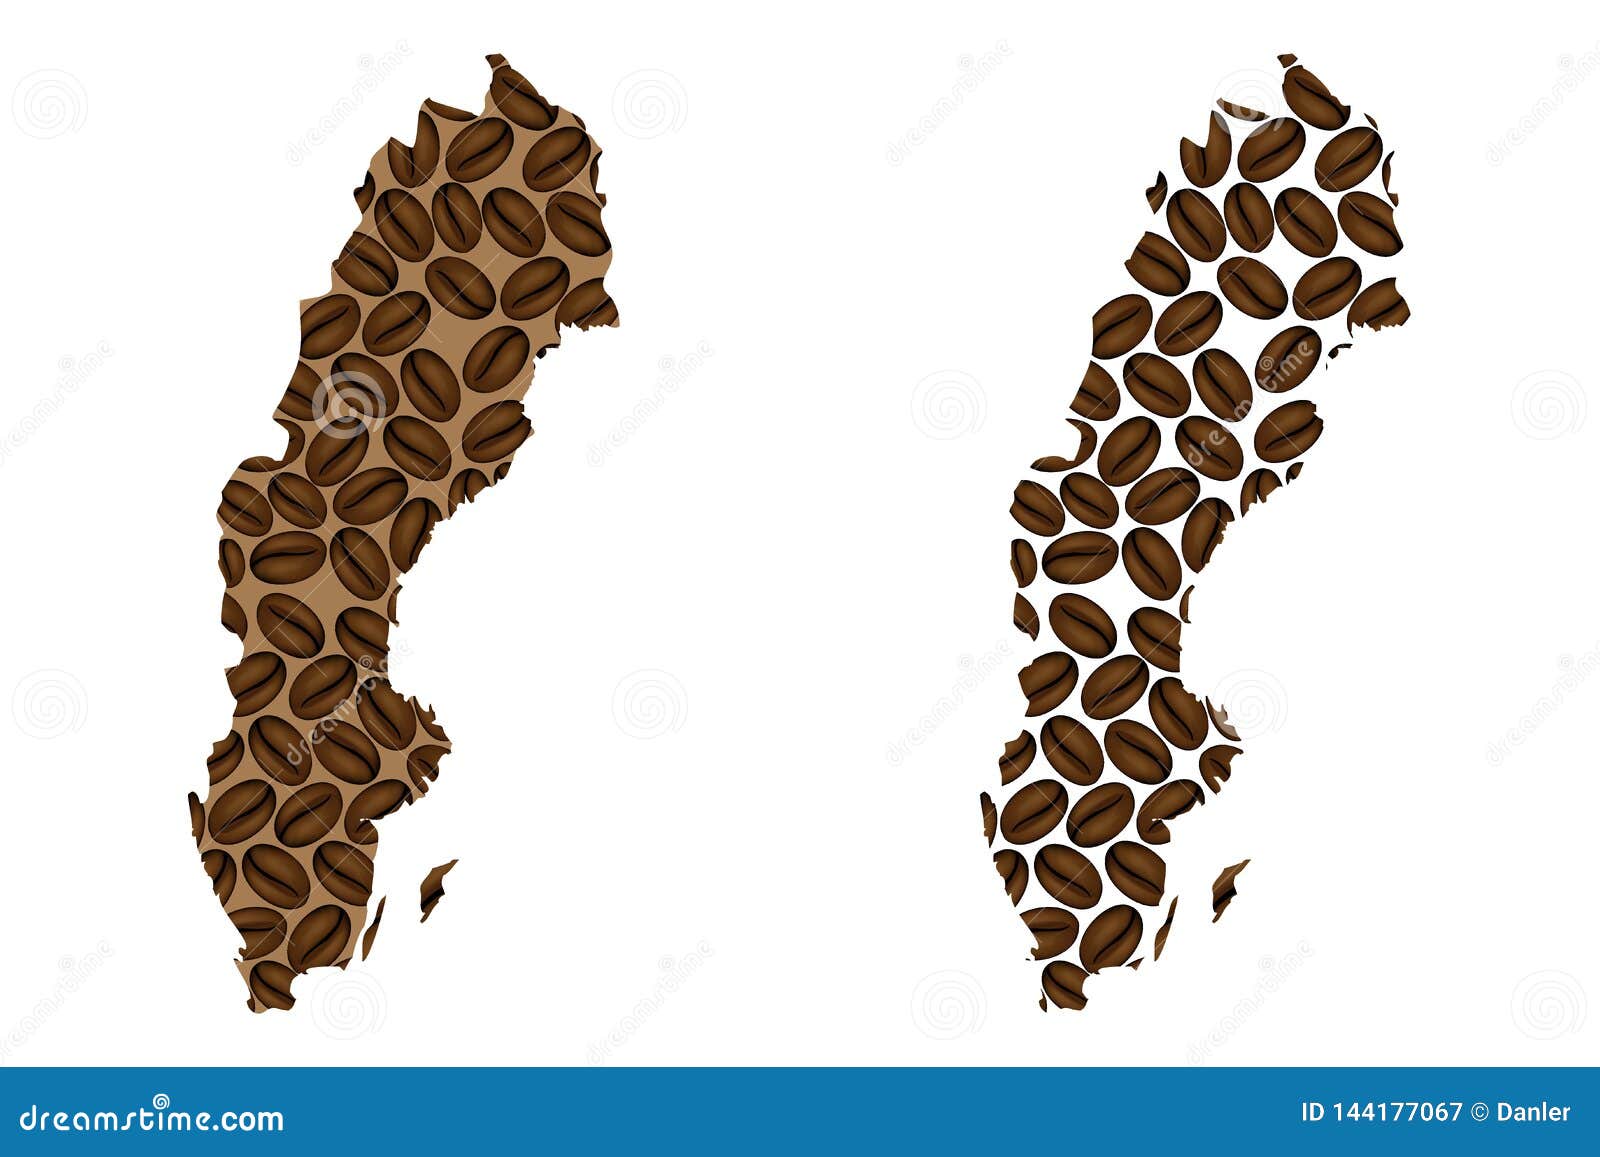 sweden -  map of coffee bean